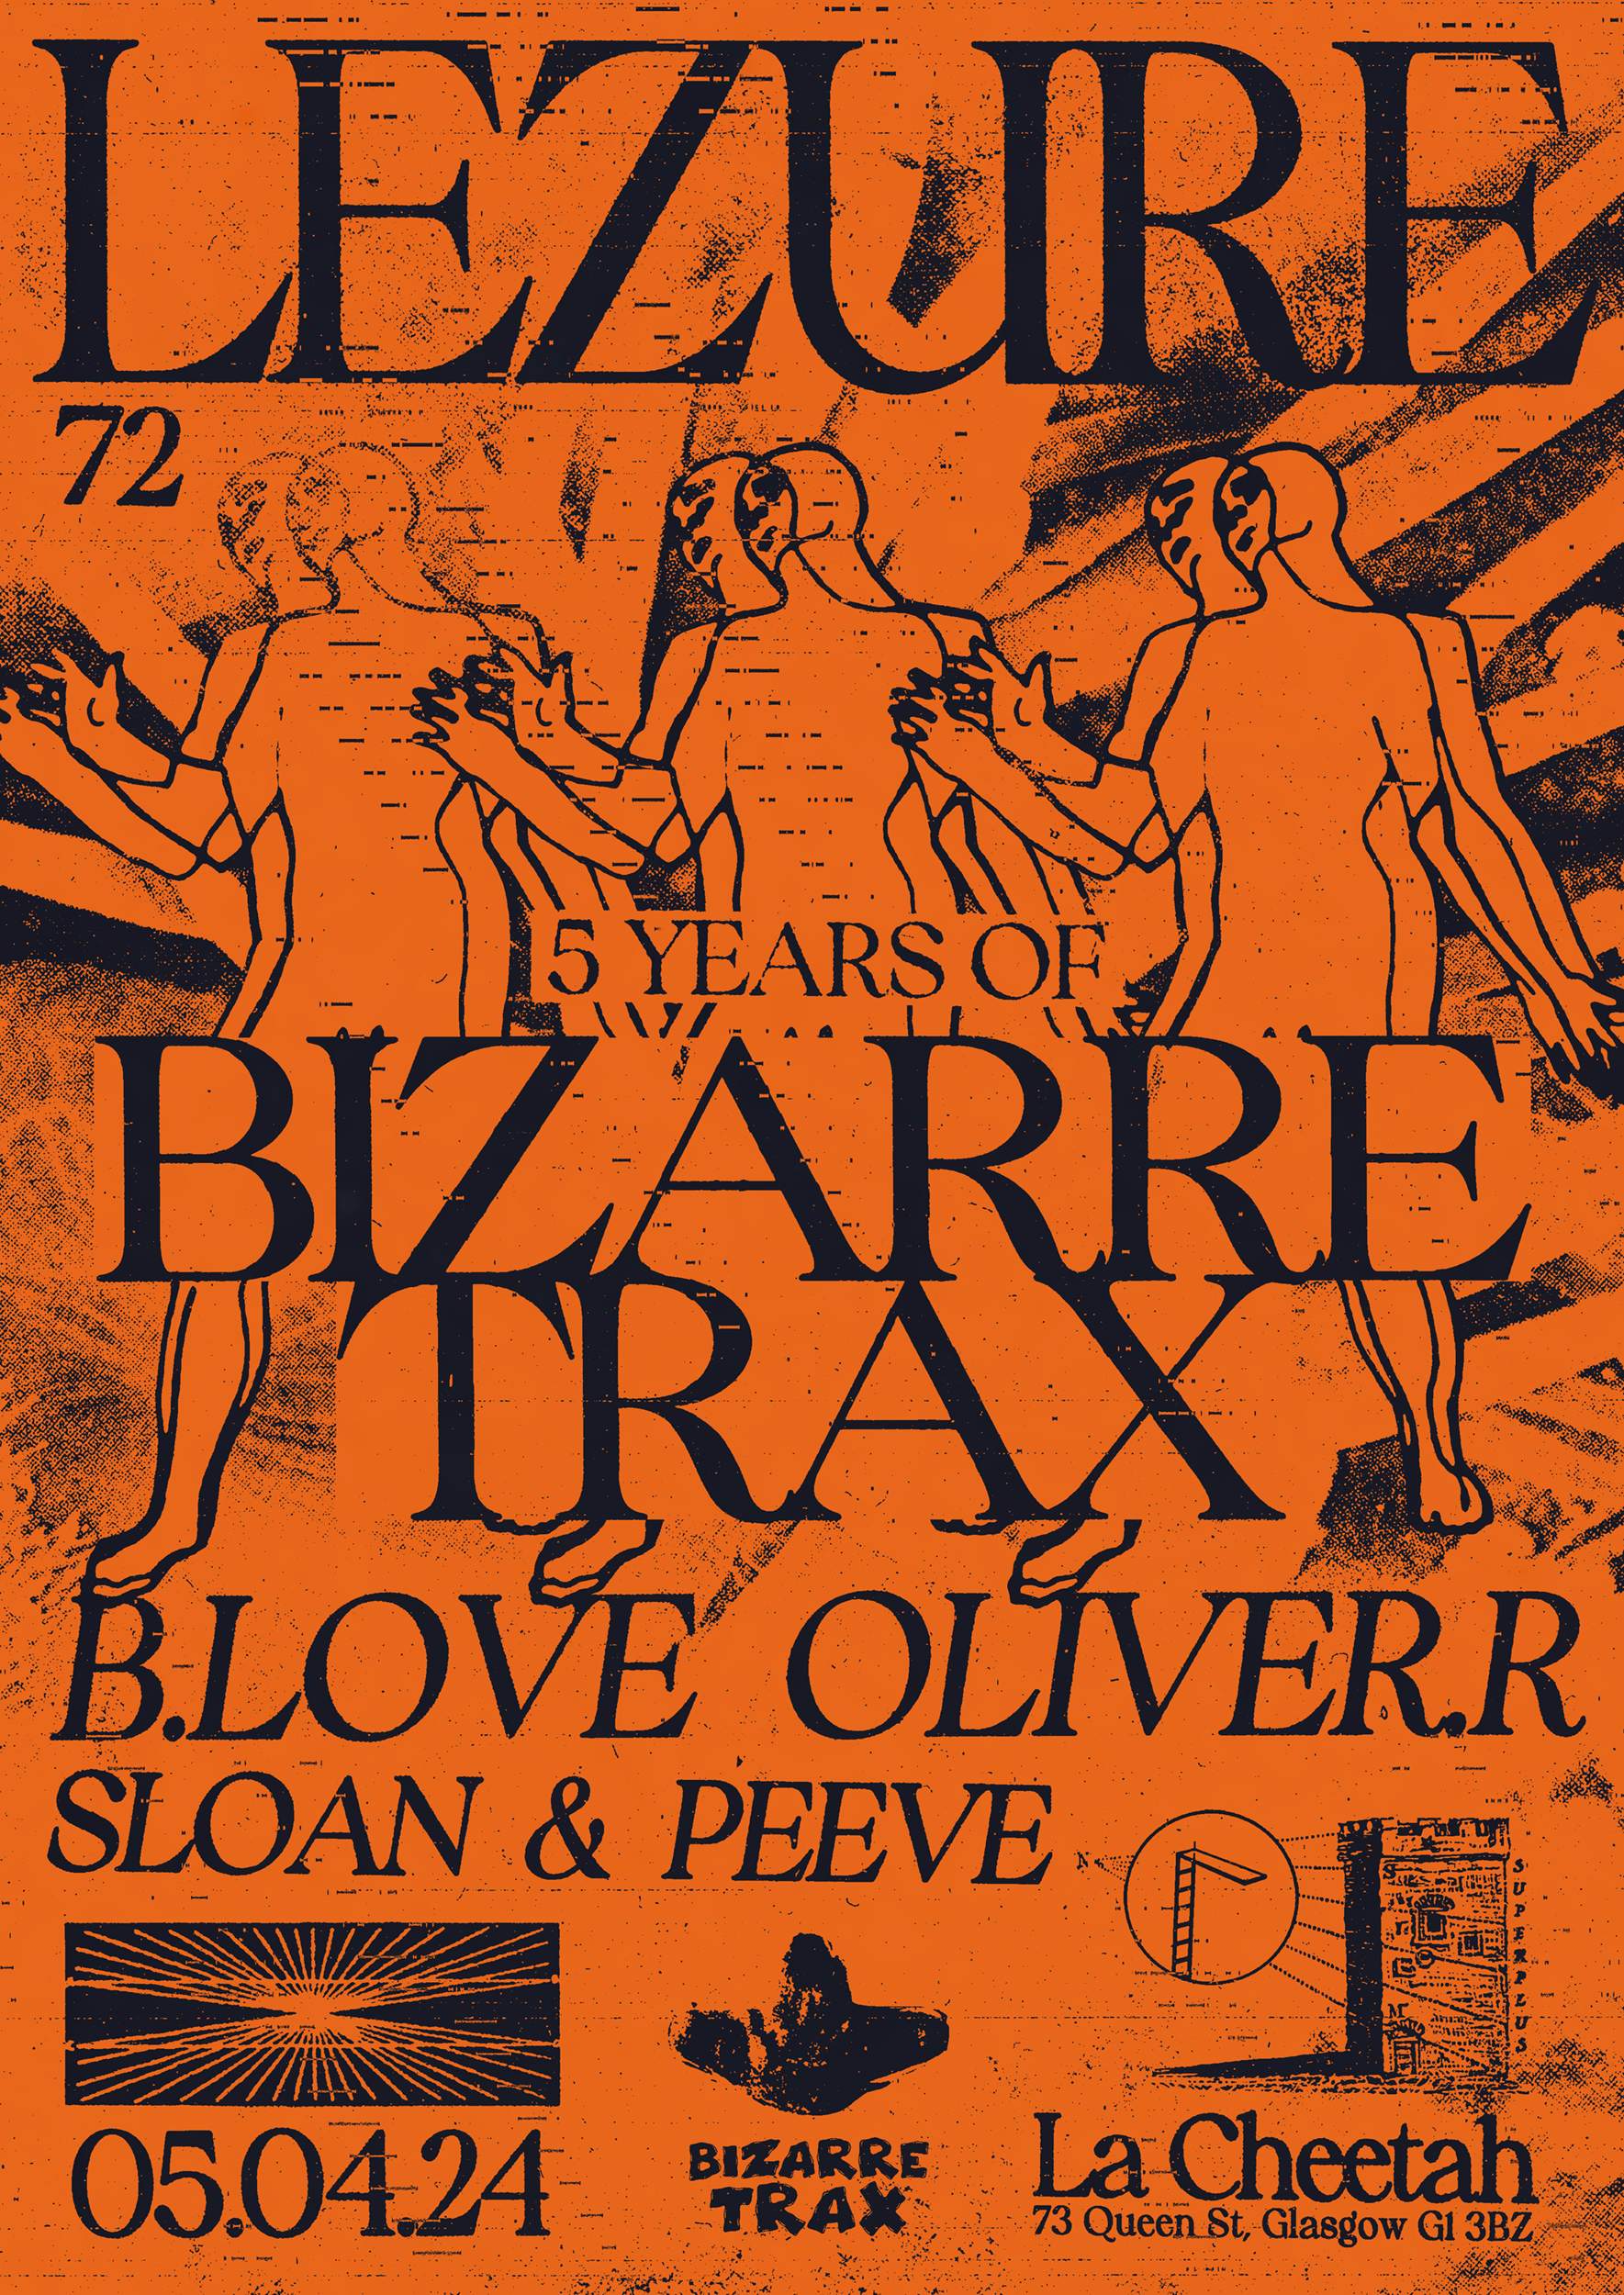 Lezure 072: 5 Years of Bizarre Trax - B.Love & Oliver.r + Sloan & Peeve - フライヤー表